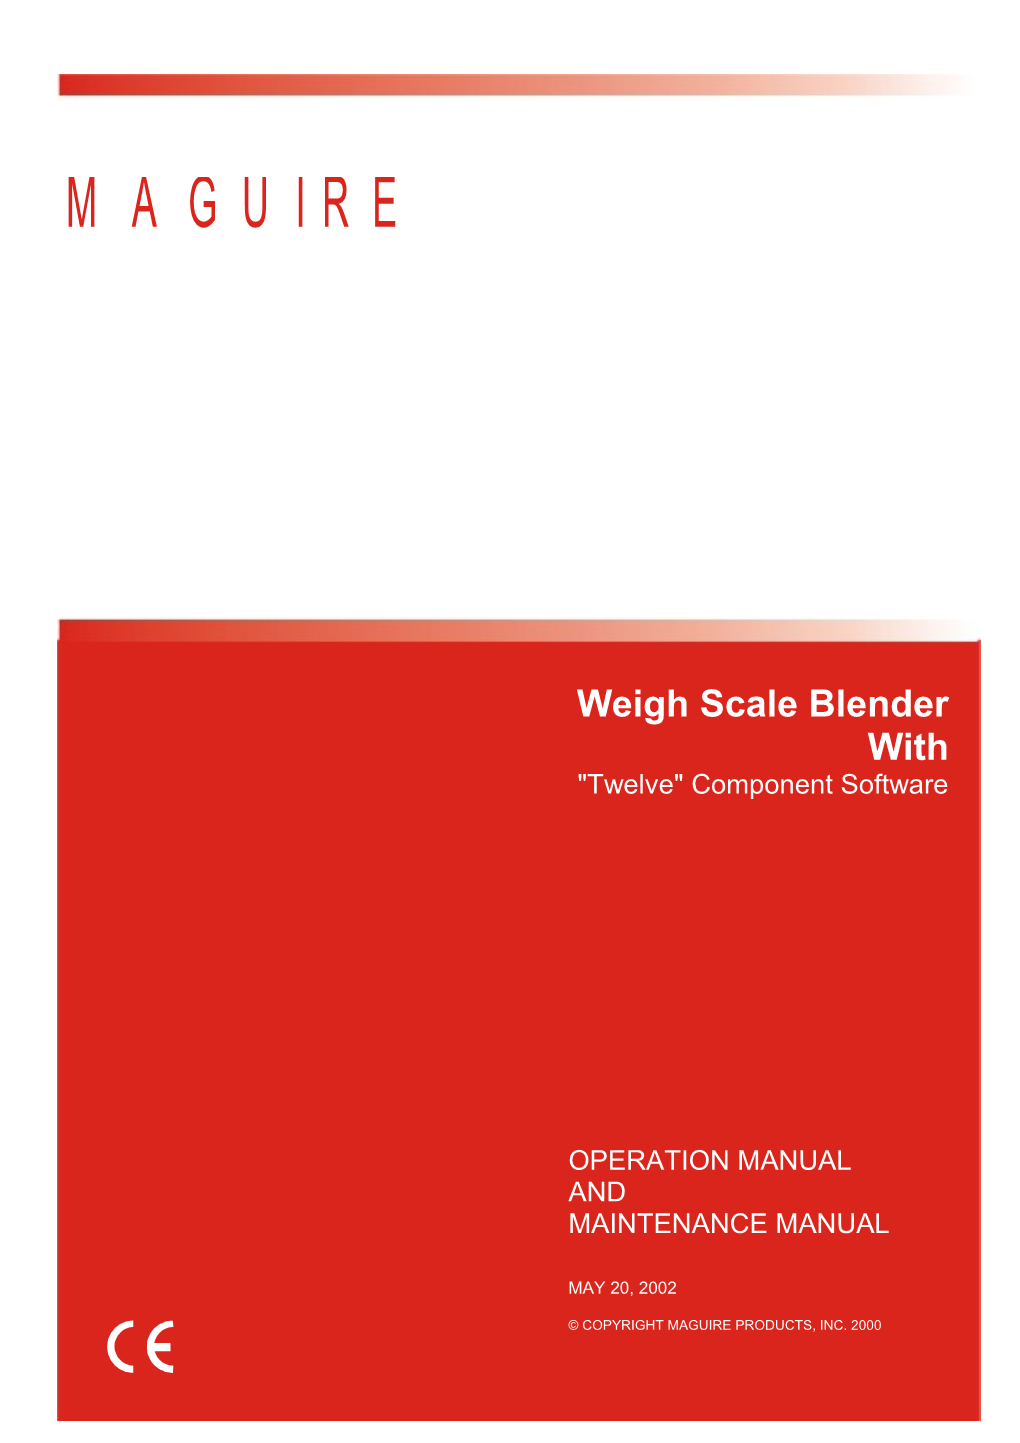 Maguire Weigh Scale Blender